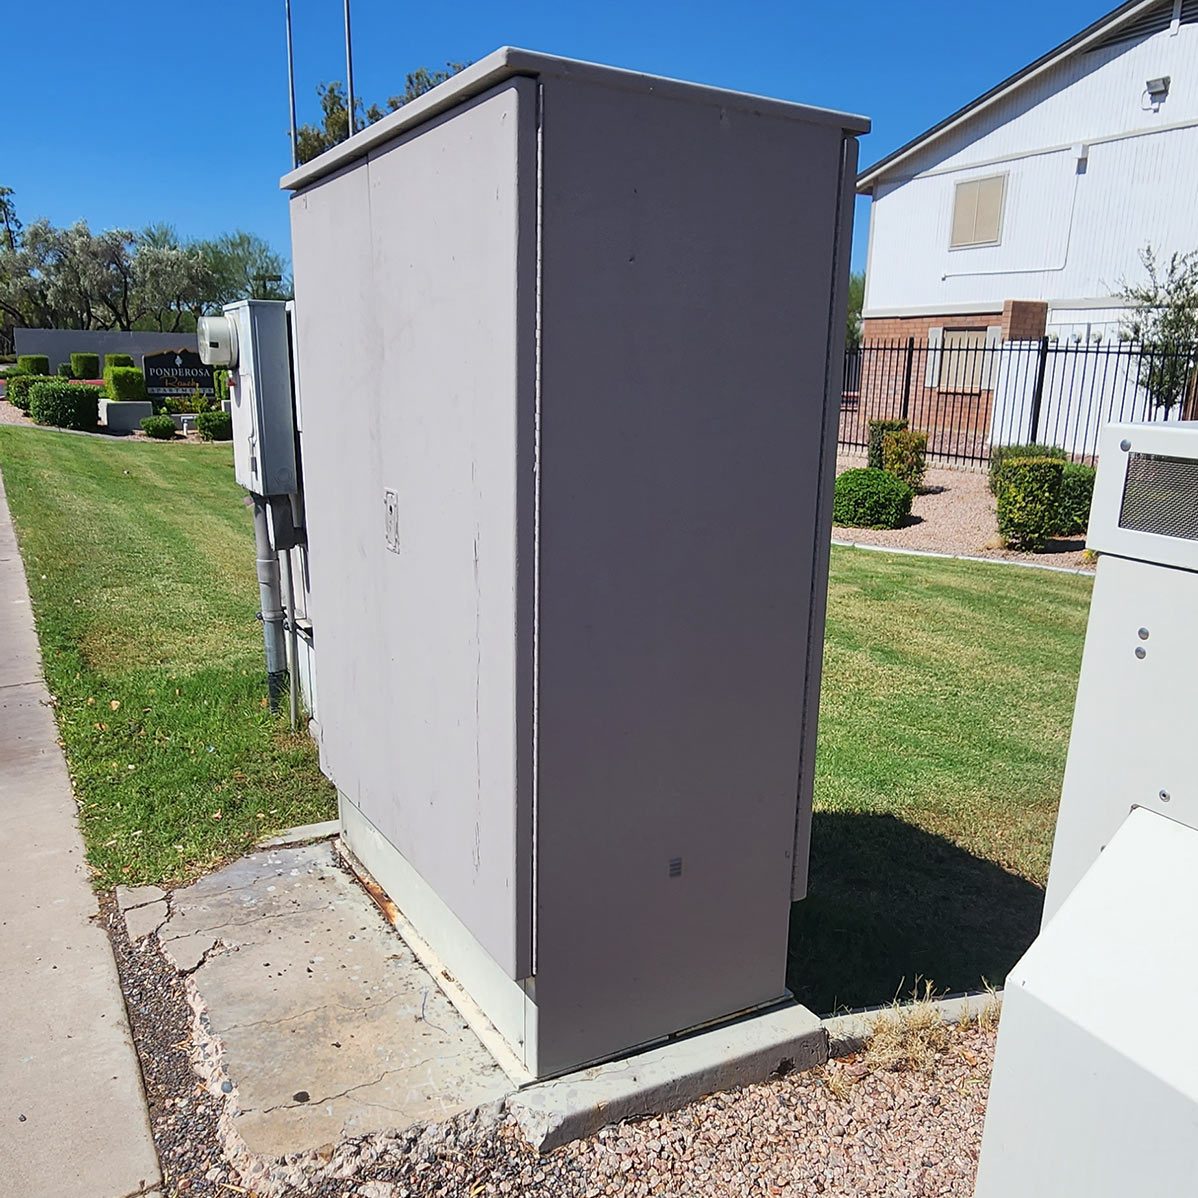 Outdoor Lighting Standards | Sustainable Practices for Electrical Box Preservation